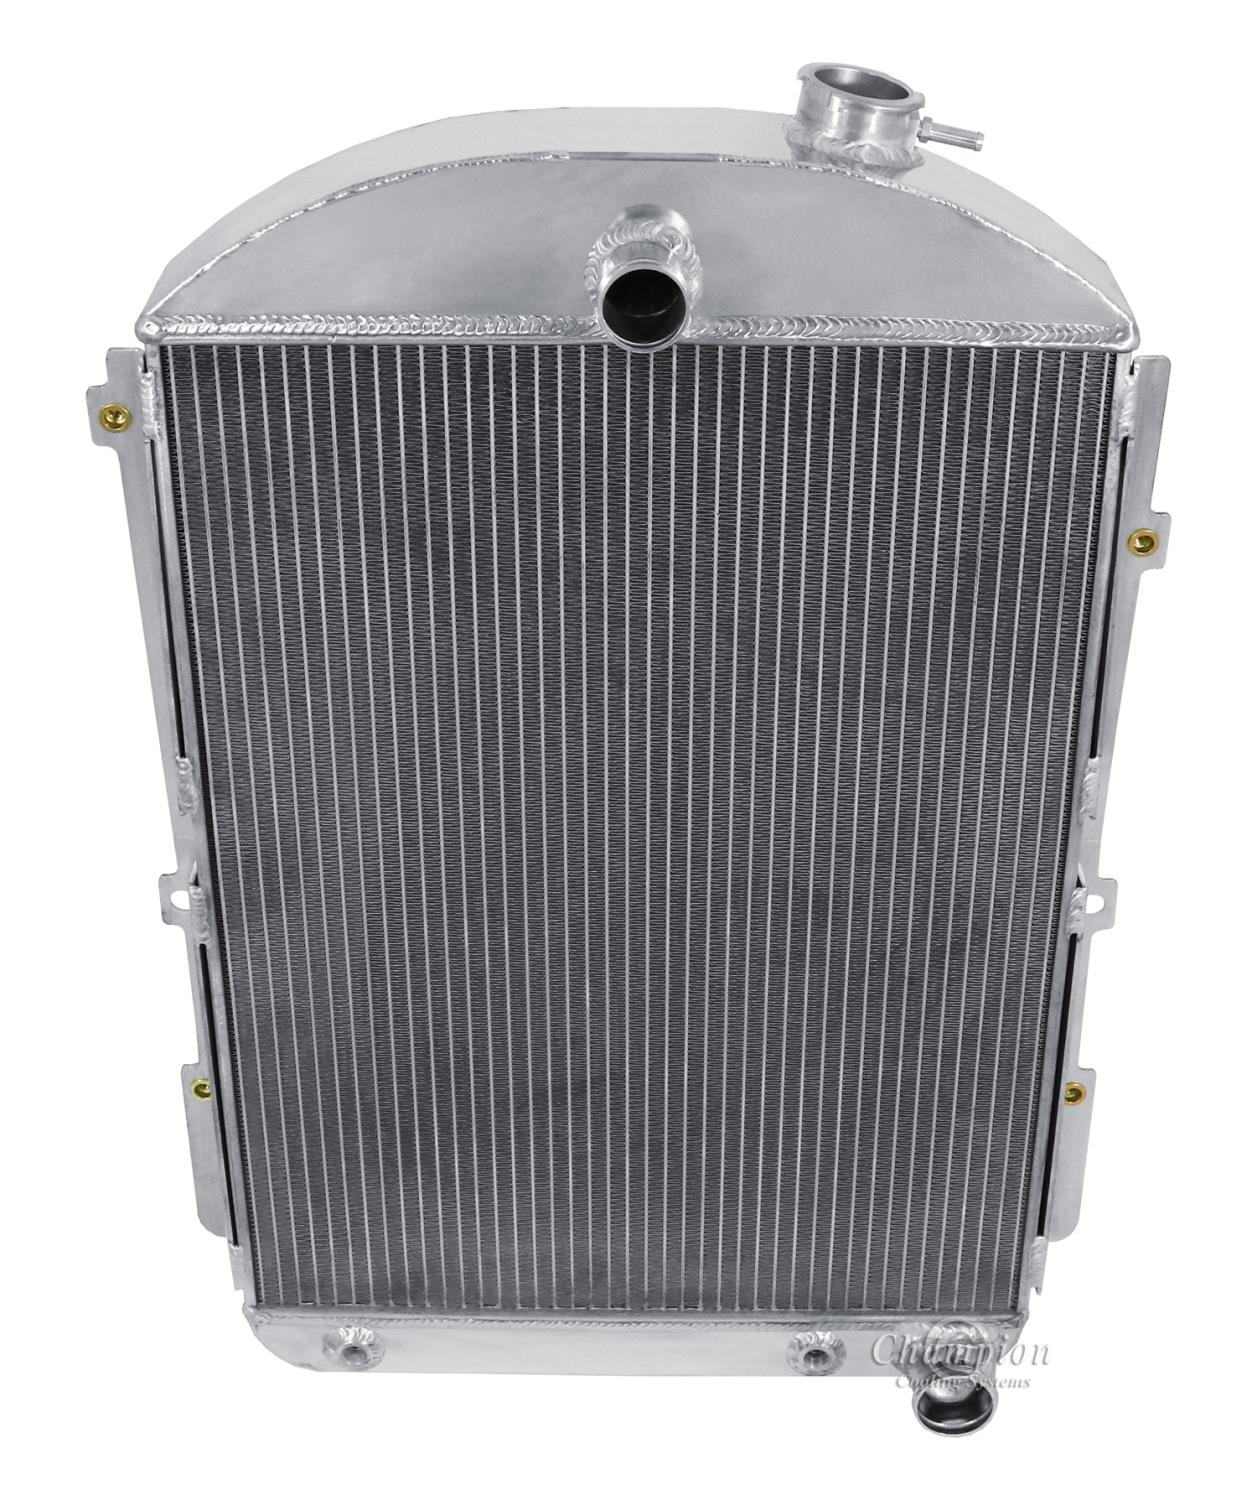 CC38CH All Aluminum Radiator for 1938 Chevrolet Master With V8 Conversion